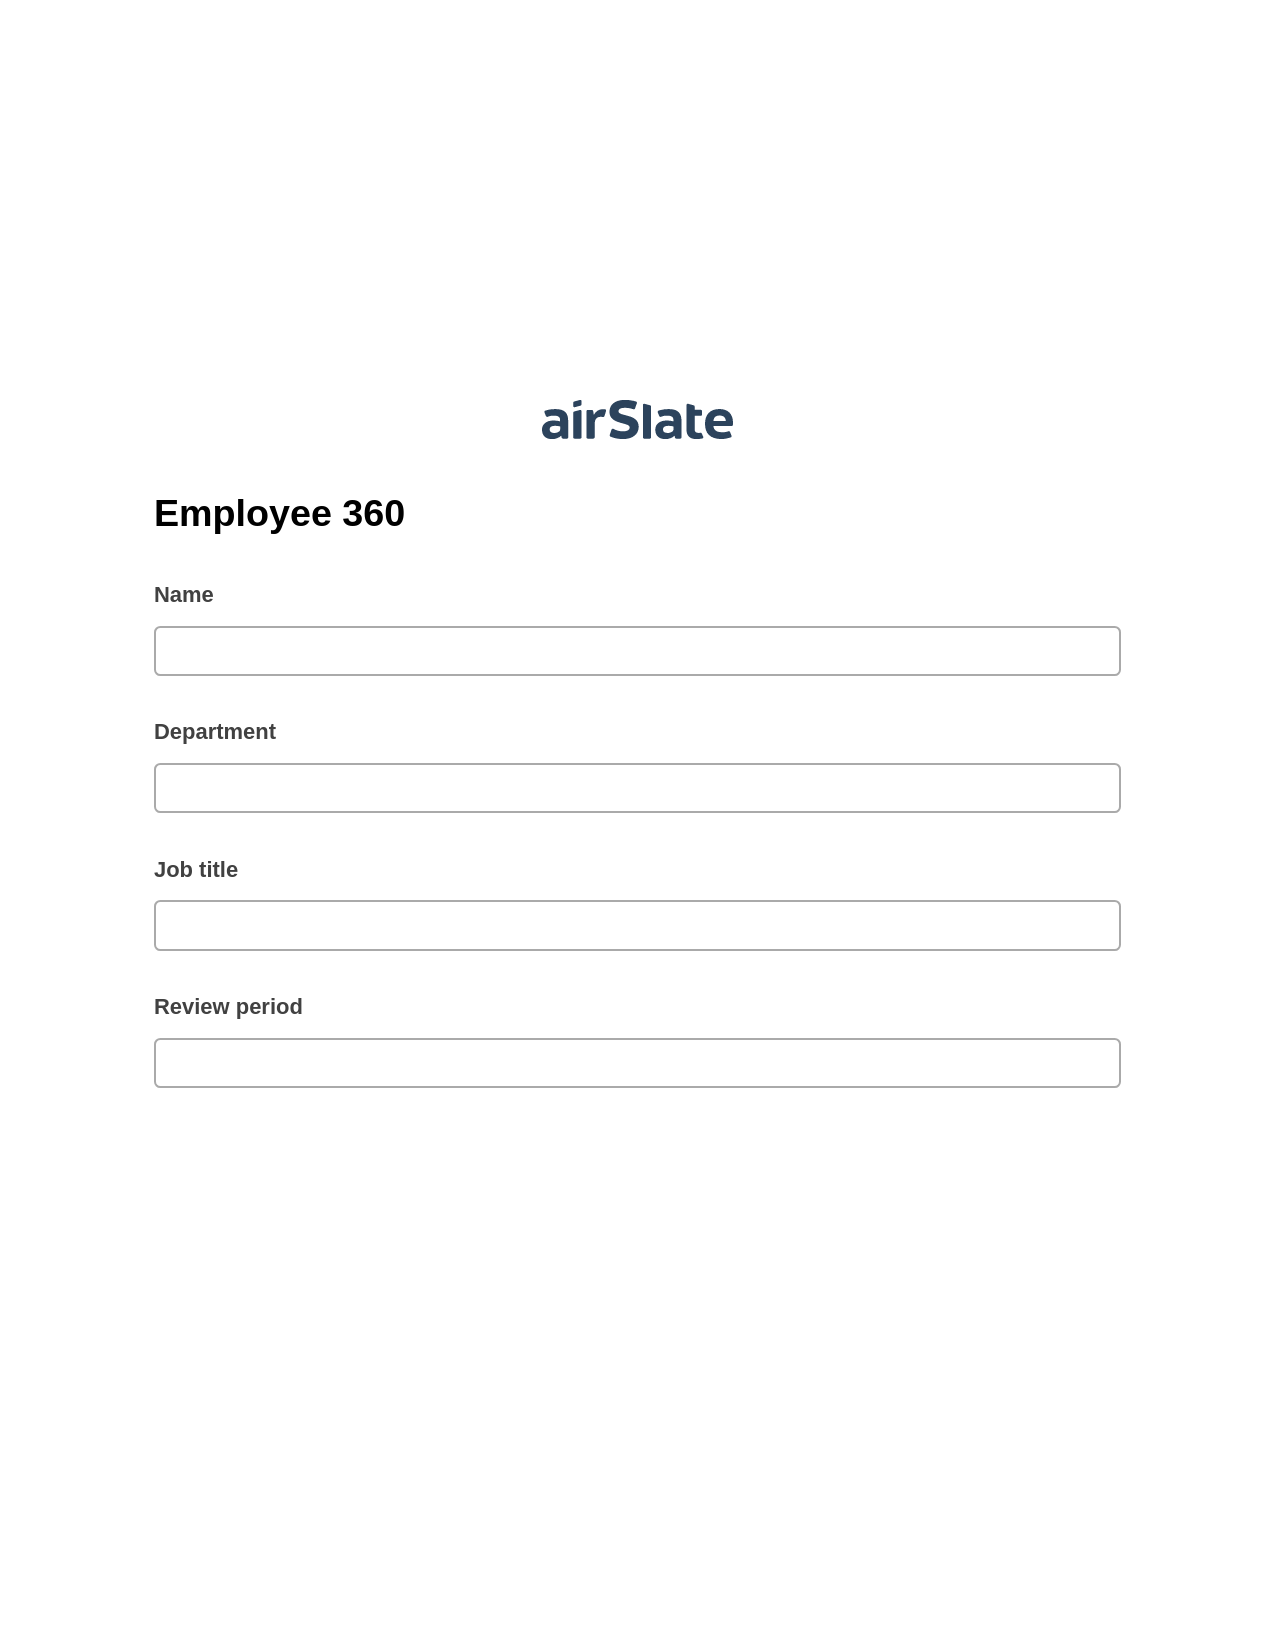 Multirole Employee 360 Pre-fill from Salesforce Records with SOQL Bot, Update NetSuite Record Bot, Archive to SharePoint Folder Bot